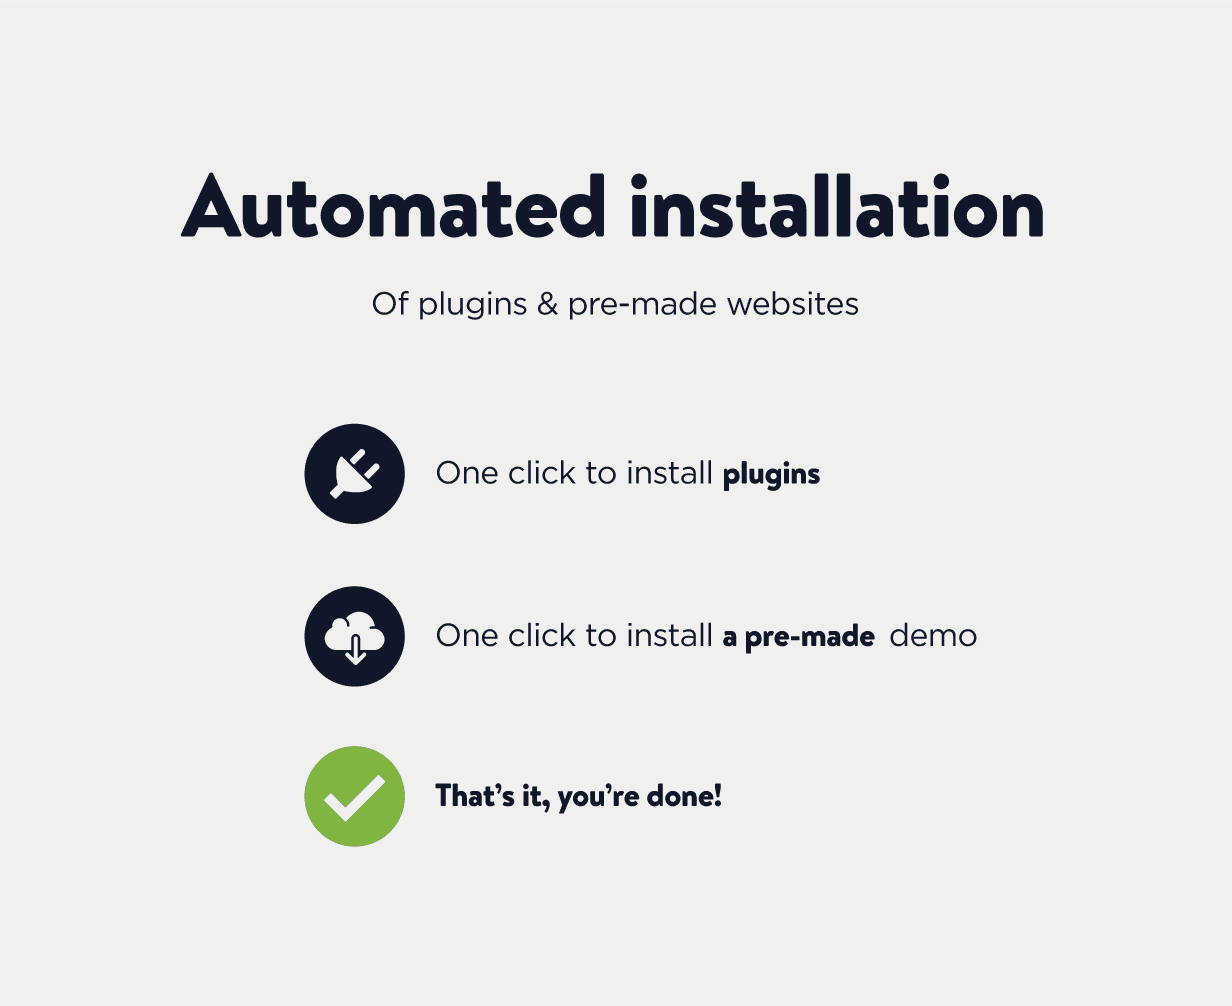 Inscription “Automated installation of plugins and pre-made websites”.